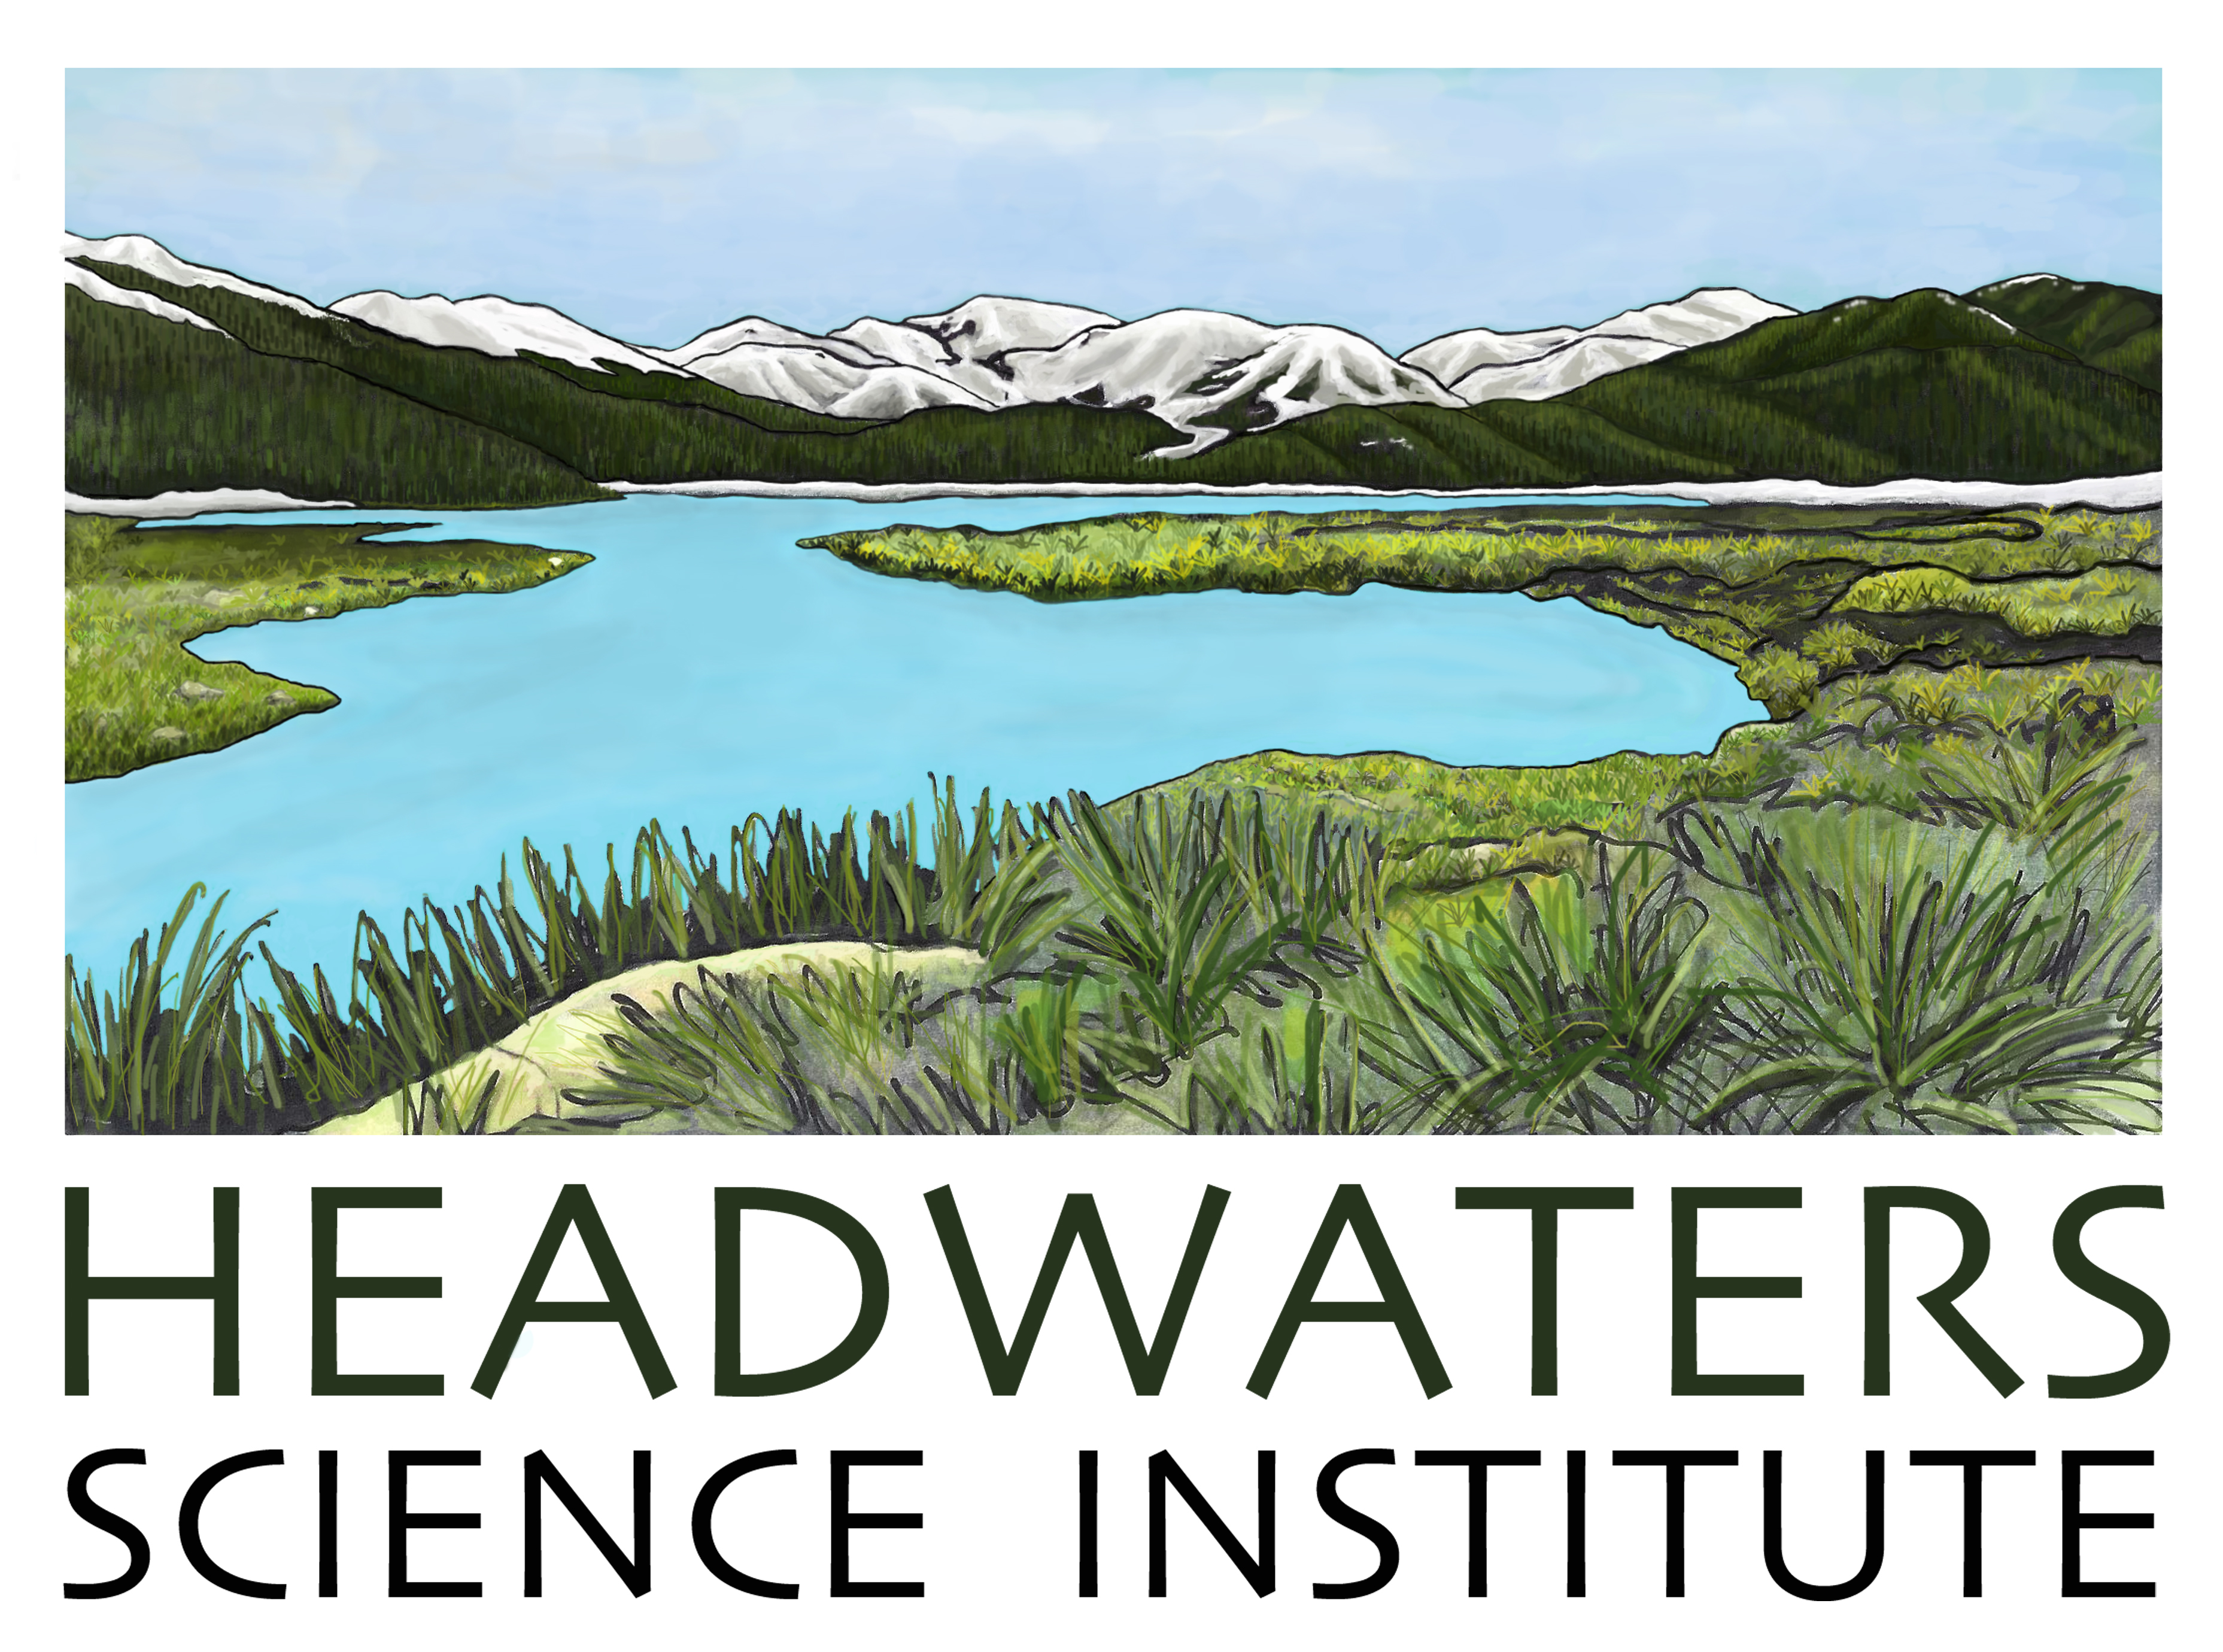 Headwaters Science Institute group image